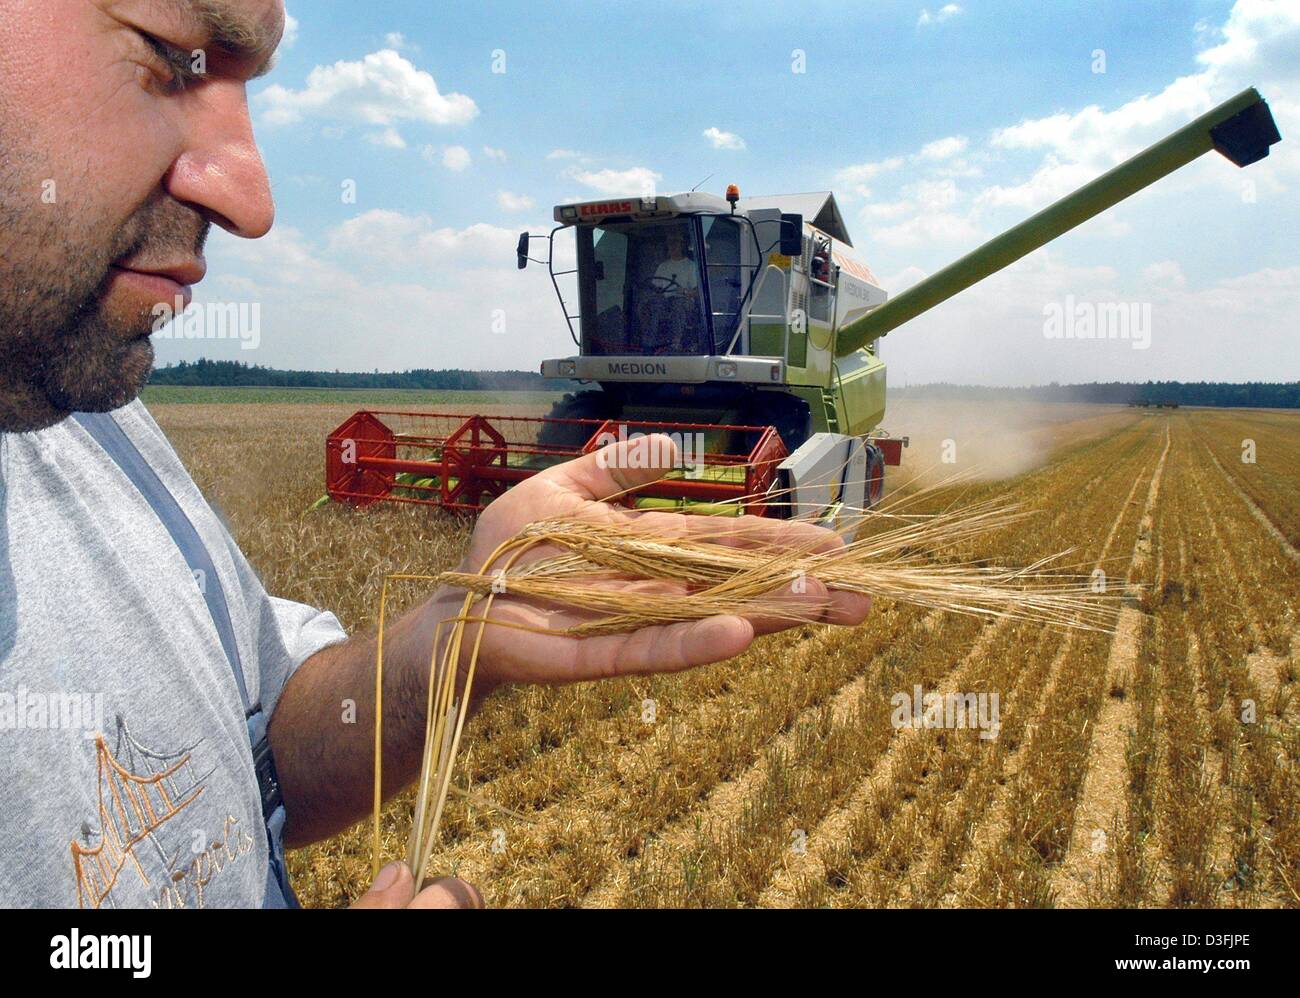 (dpa) - Farmer Max Buchner is checking winter barley during the harvesting on his field near Suenching, Germany, 8 July 2003. Due to the long hot and dry period growers expect massive harvest losses. Winter cereal like barley and wheat have matured too fast so the corn does not grow to its fullest size and produces less flour. Stock Photo